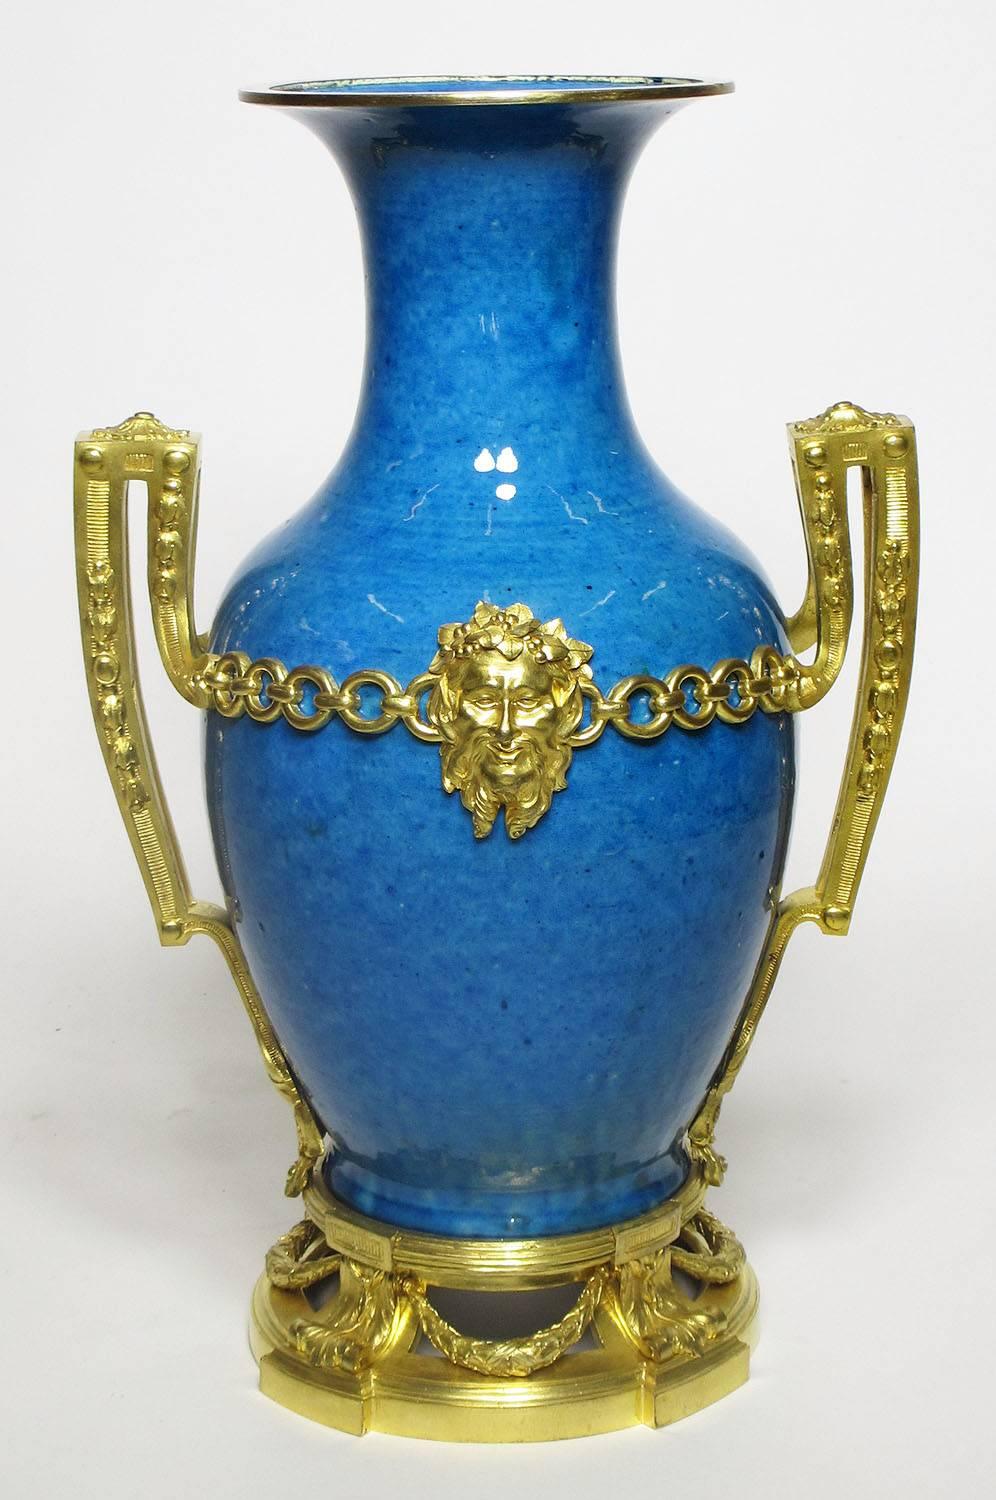 A very fine and impressive pair of French 19th century Louis XVI style ormolu-mounted blue-glazed enamel over bronze vases with allegorical masks, rings and wreaths. The porcelain is probably Chinese 18th century Qianlong period, the bronze mounts